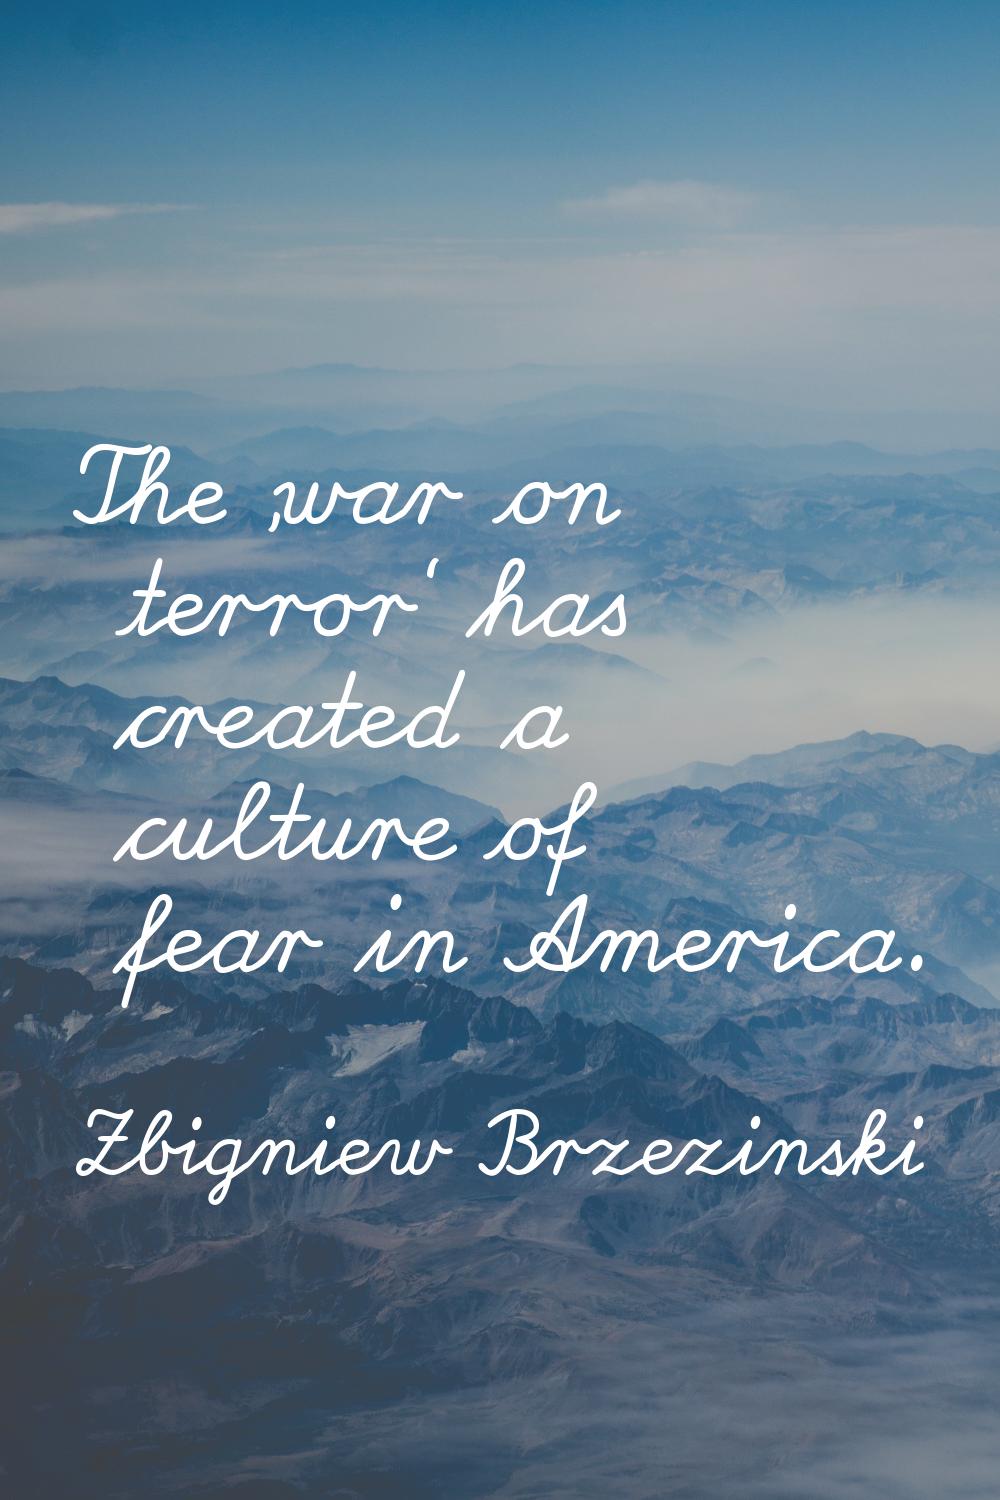 The 'war on terror' has created a culture of fear in America.